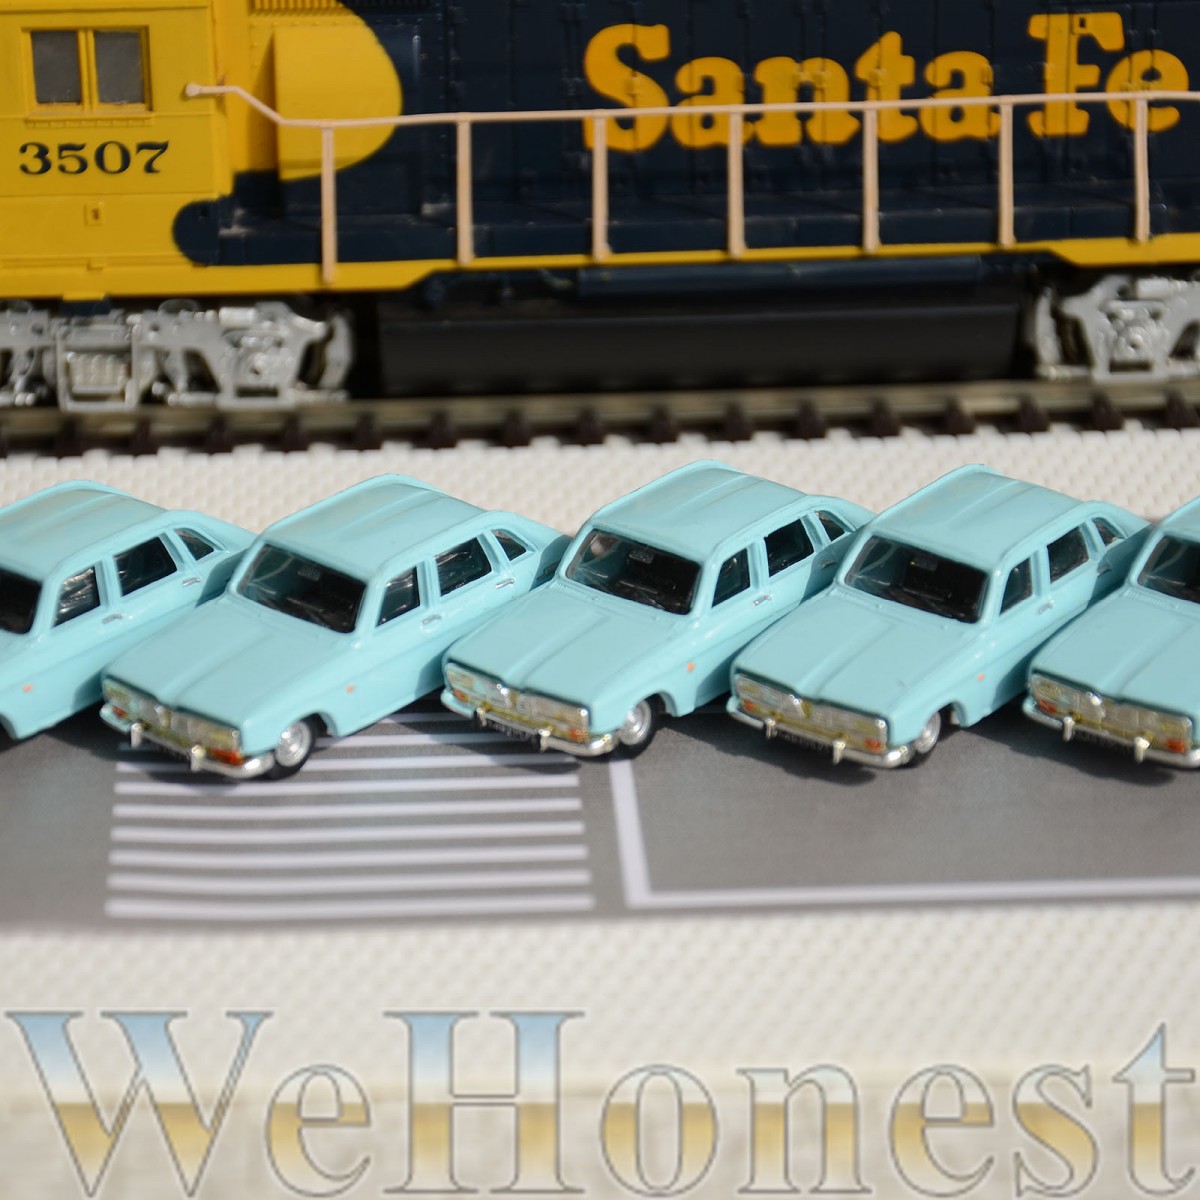 5 x Metal Model Cars 1:87 HO Scale for Building Railroad Train Scenery Blue